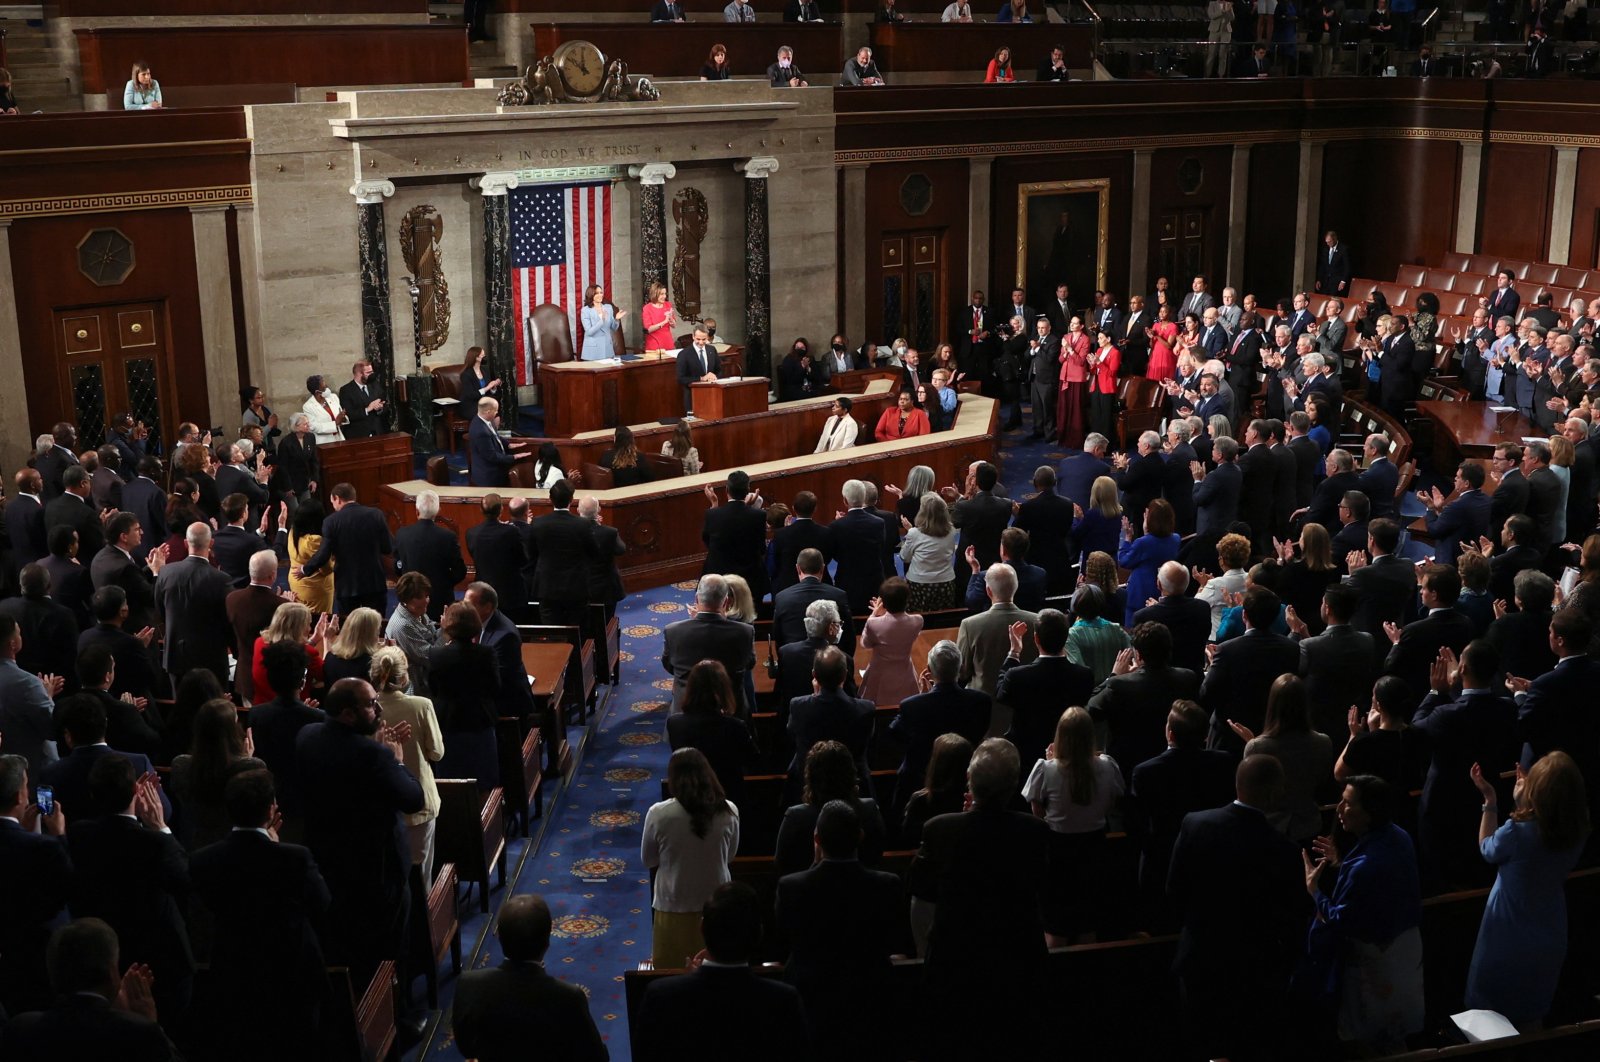 Greek Prime Minister Kyriakos Mitsotakis delivers an address to a joint meeting of Congress inside the House Chamber of the U.S., the Capitol in Washington, U.S., May 17, 2022. (Reuters Photo)